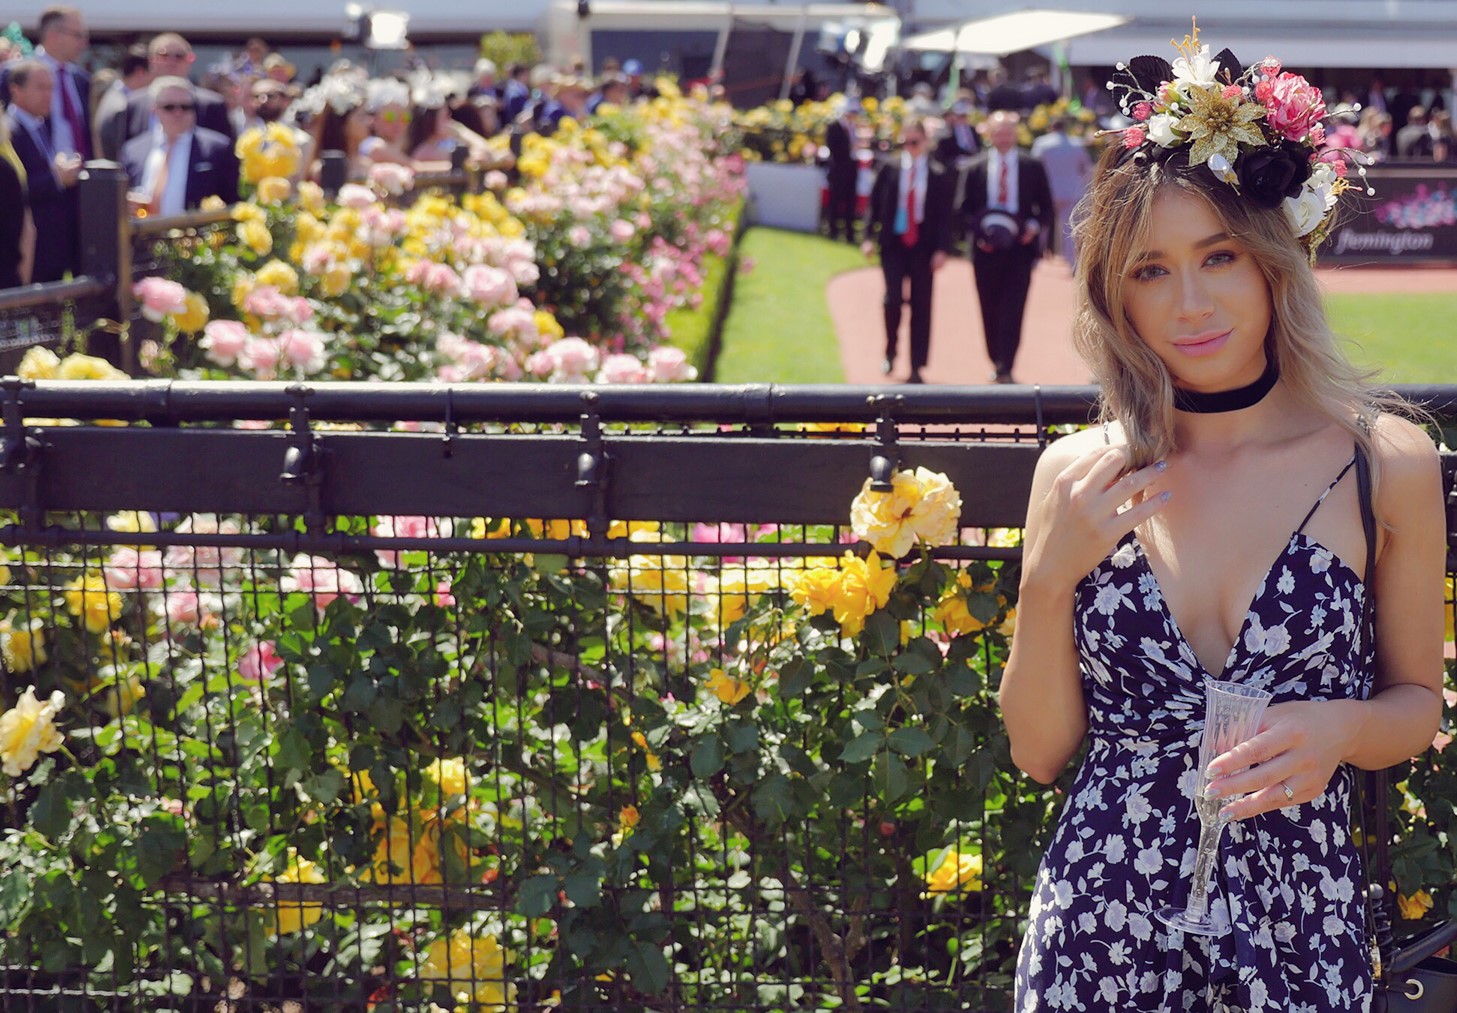 KENNEDY OAKS DAY DURING THE MELBOURNE CUP - BiiBiiBeauty